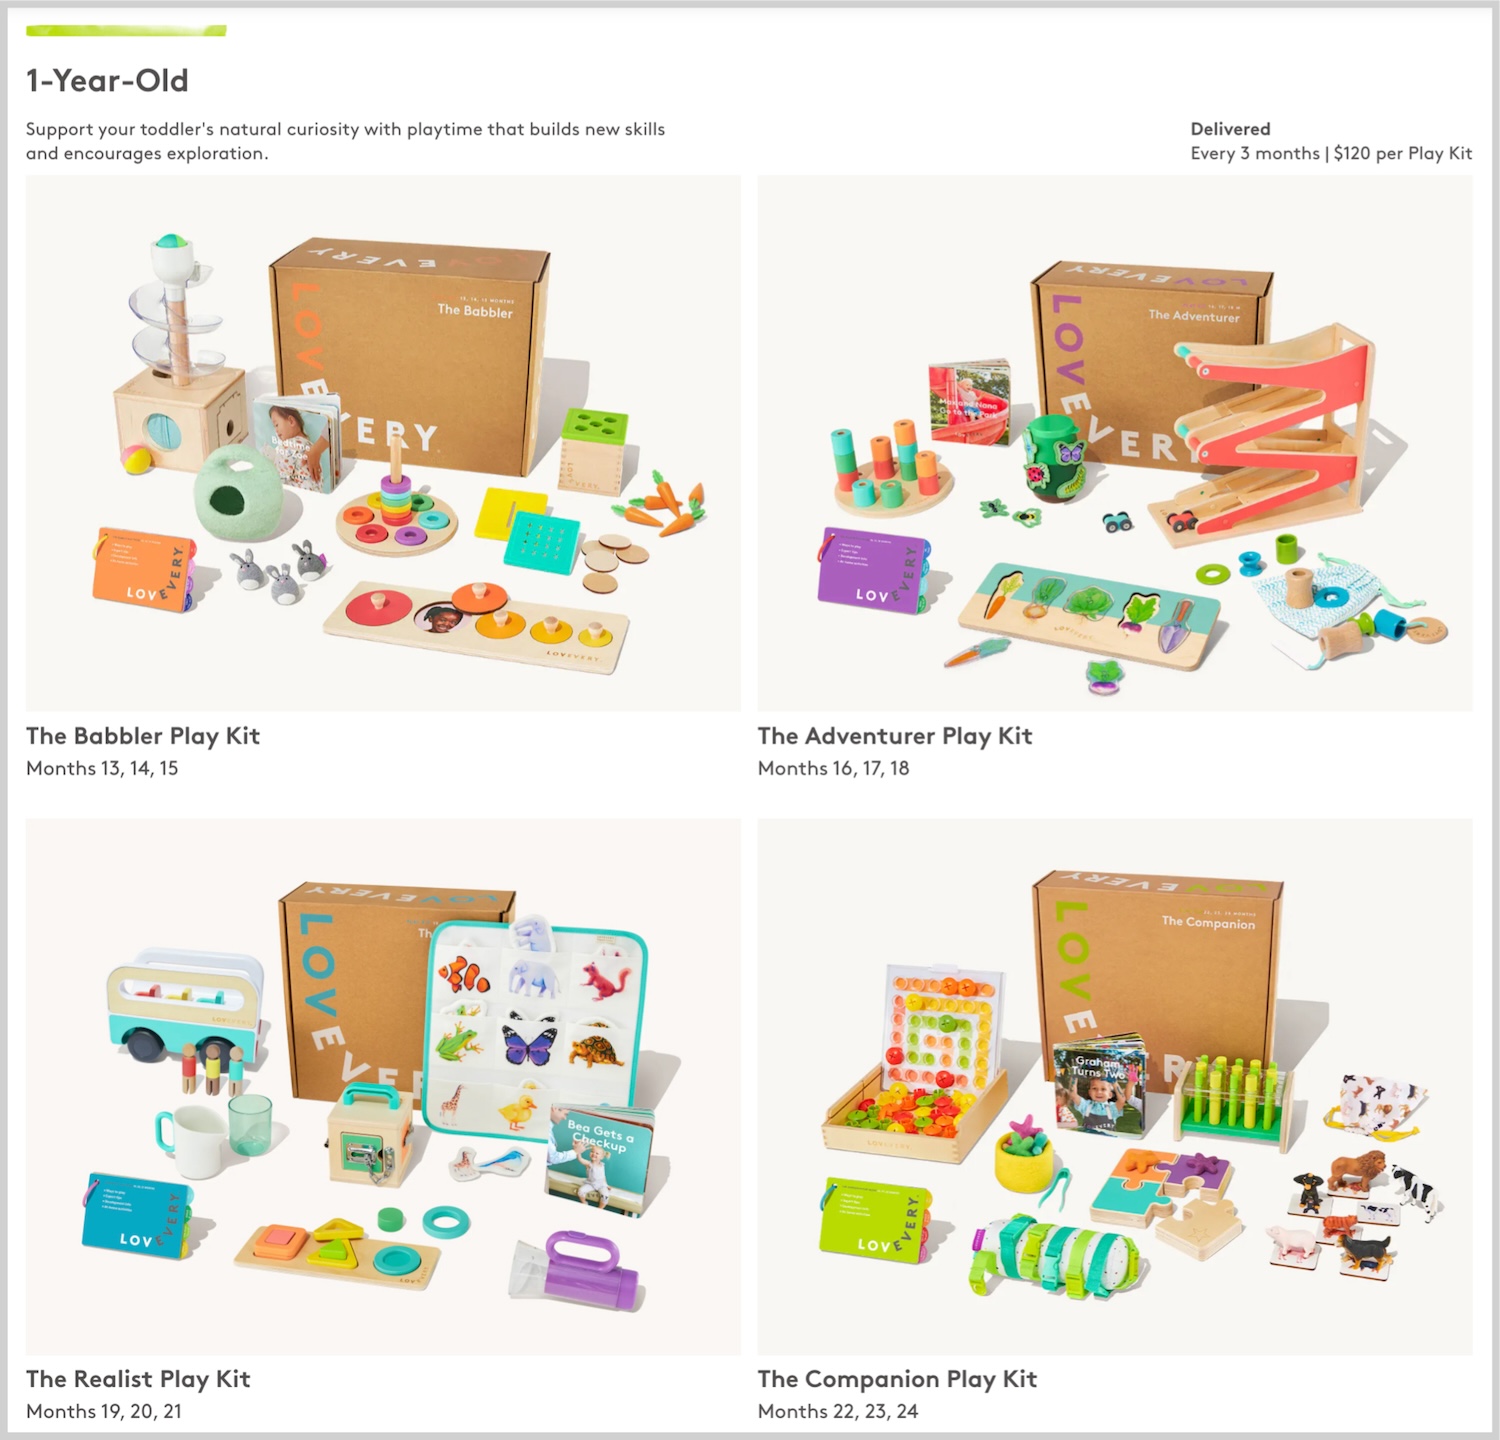 lovevery reviews play kits for 1 year old toddlers